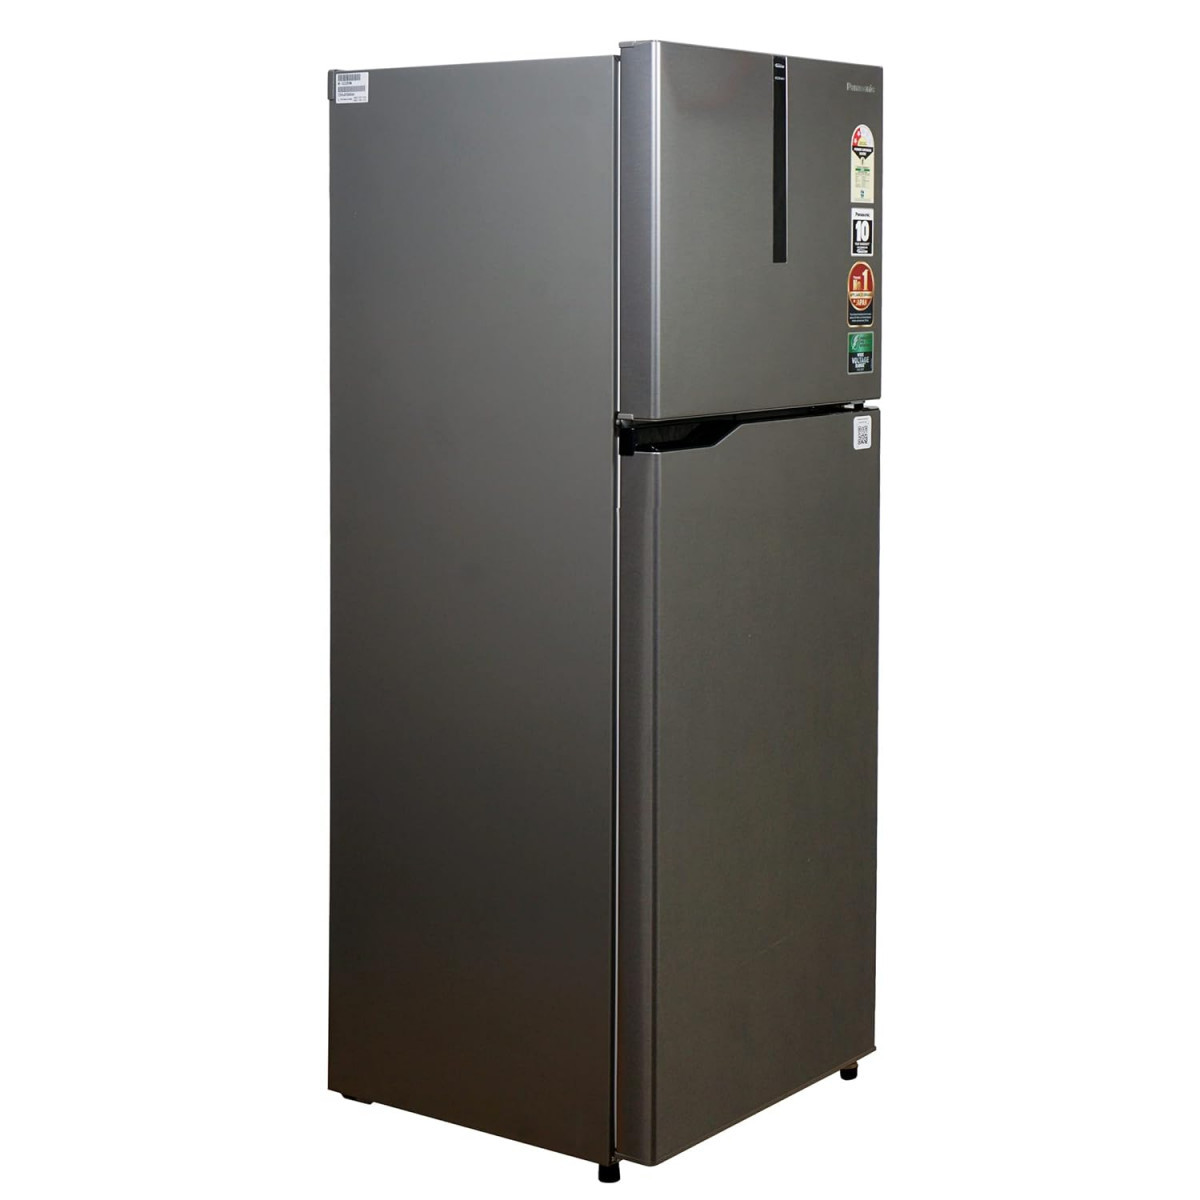 Panasonic 309 L 2 Star NR-TG322BVHN Electric Grey 6-Stage Smart Inverter Frost-Free Double Door Refrigerator